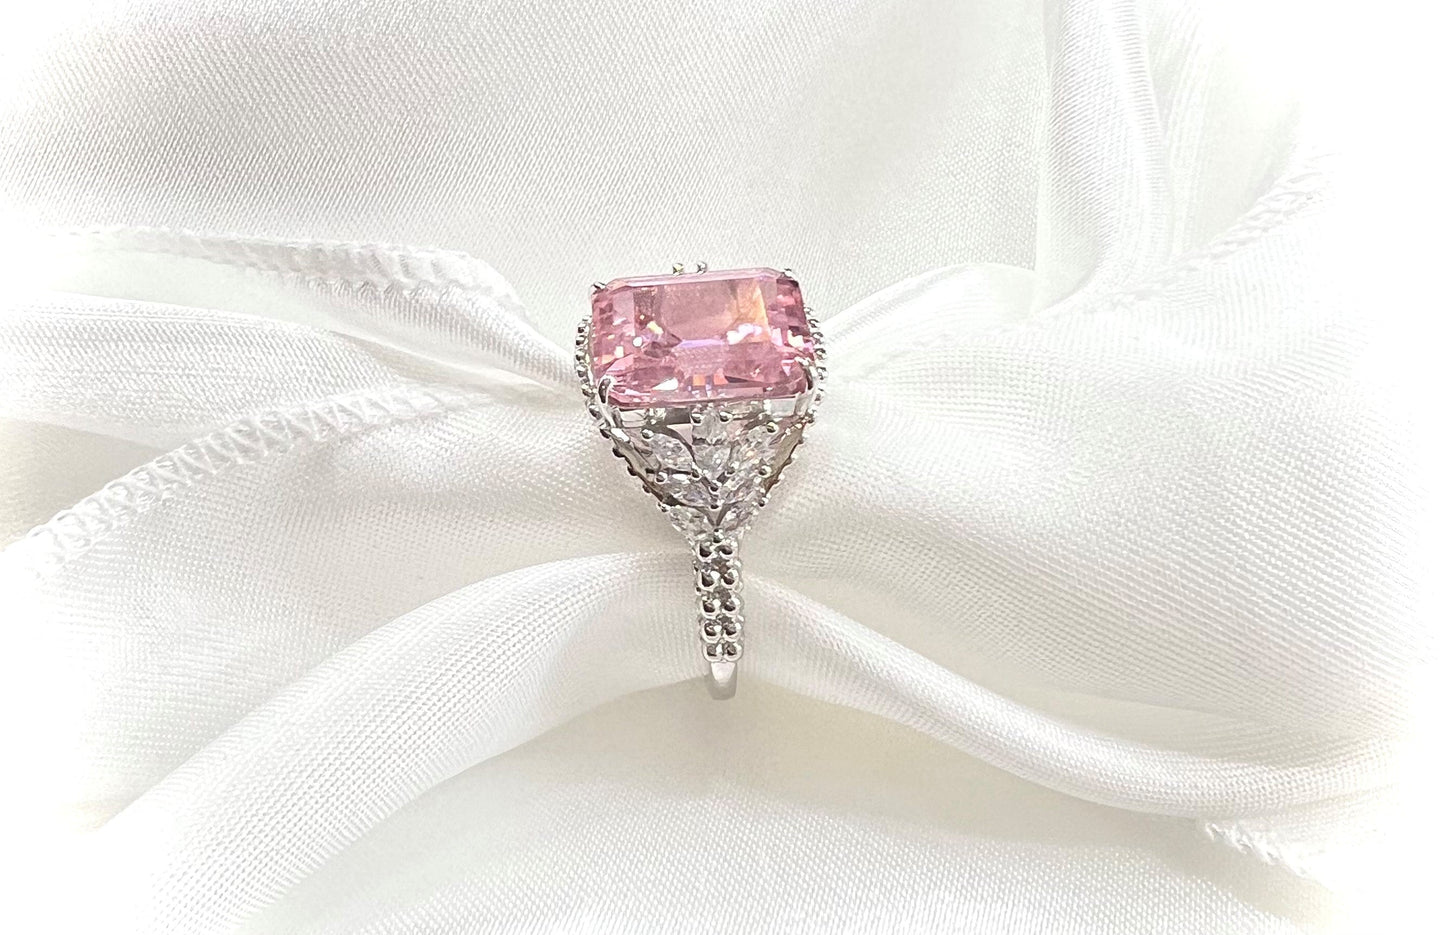 *PRE-ORDER - Emerald-Cut Pink CZ Beaded Shank 925 Sterling Silver Ring